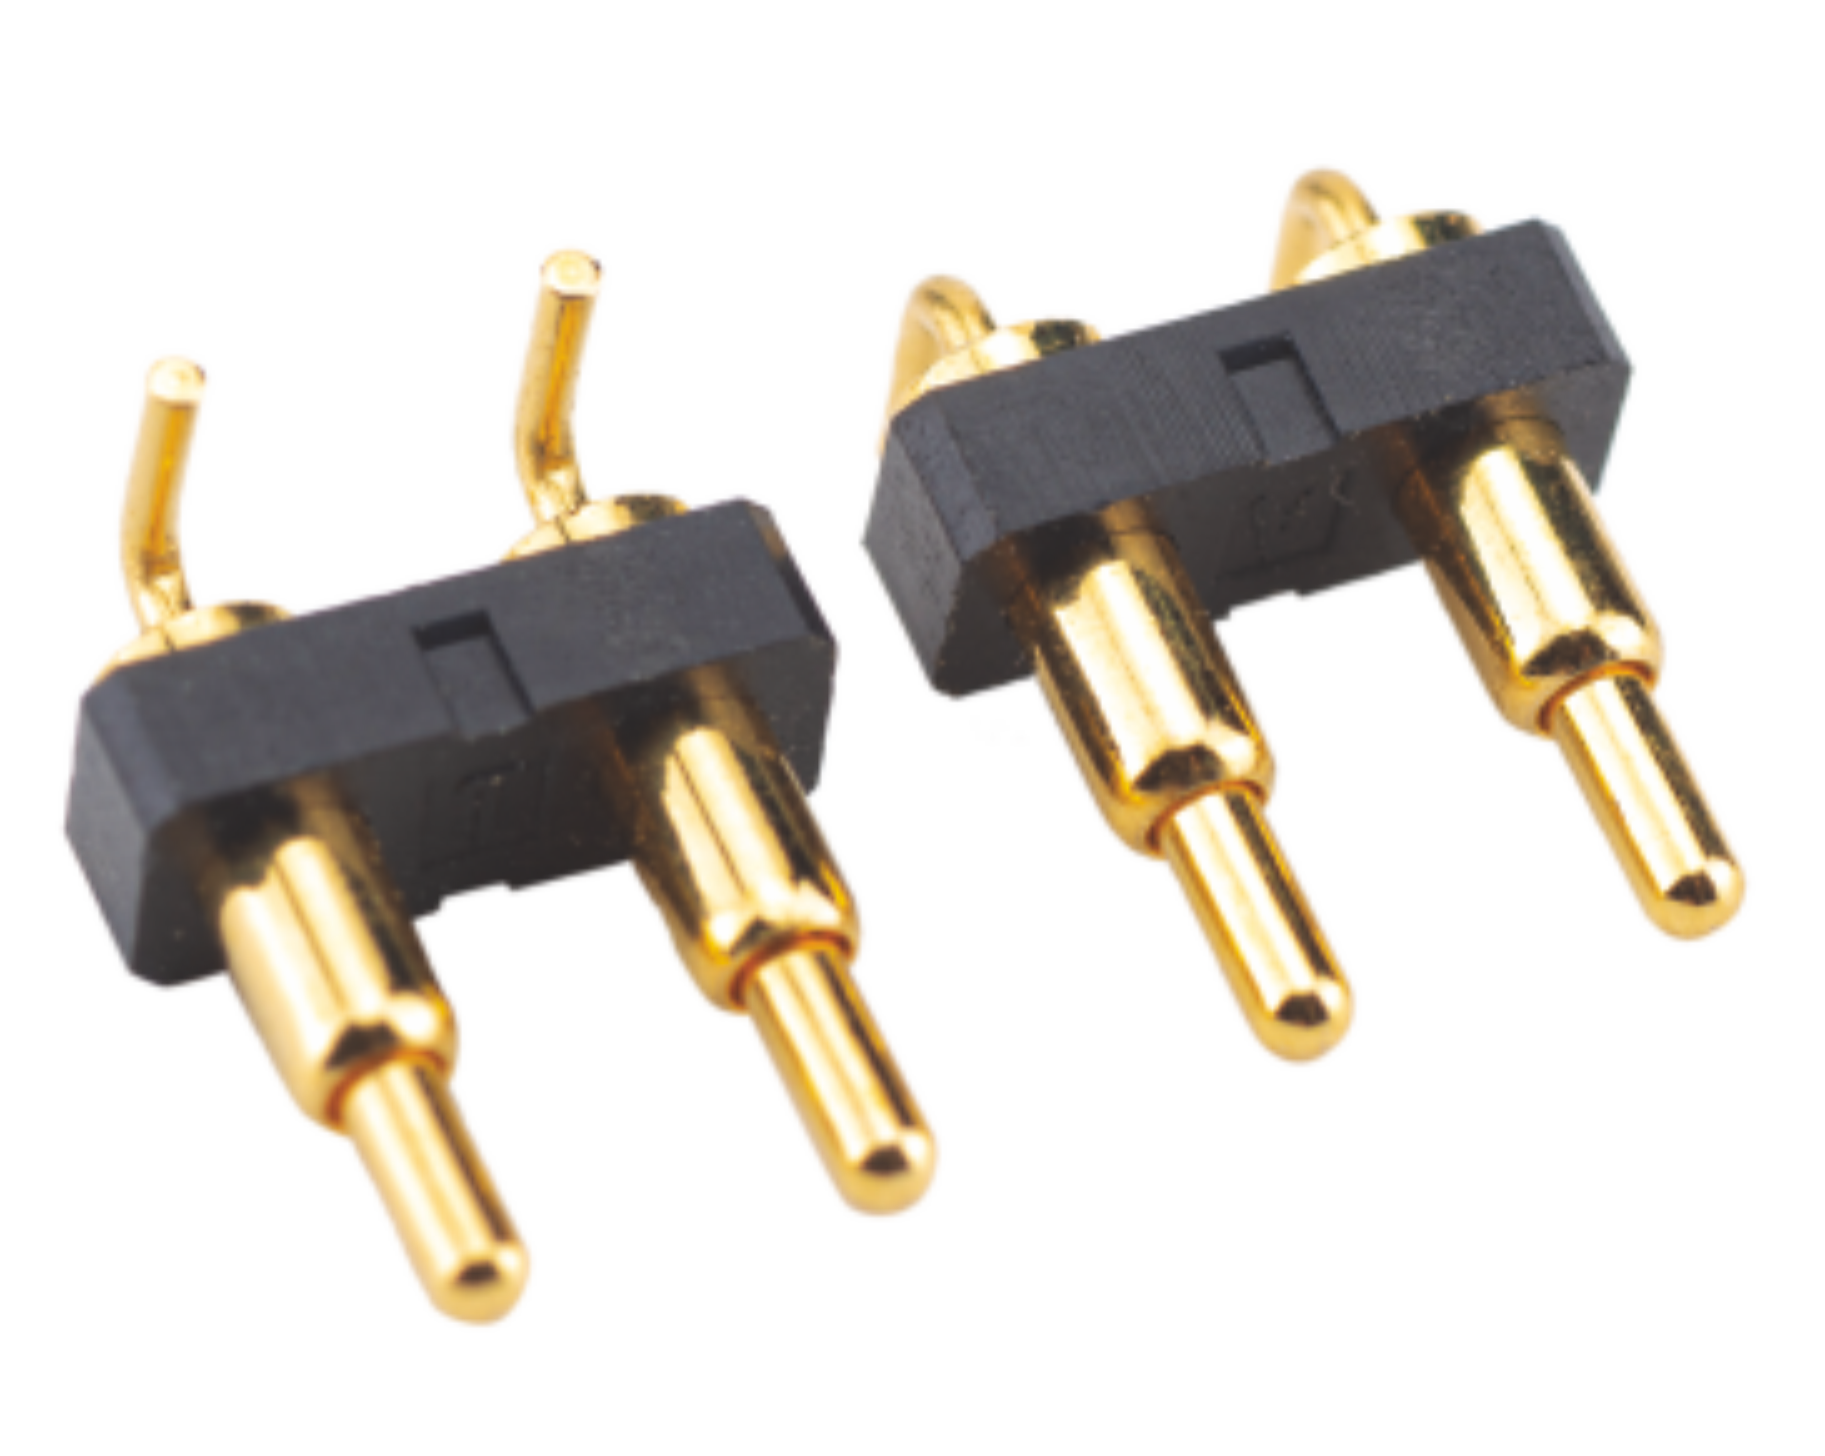 Spring loaded connector 2P 3.5mm pitch pogo pin R/A Dip type